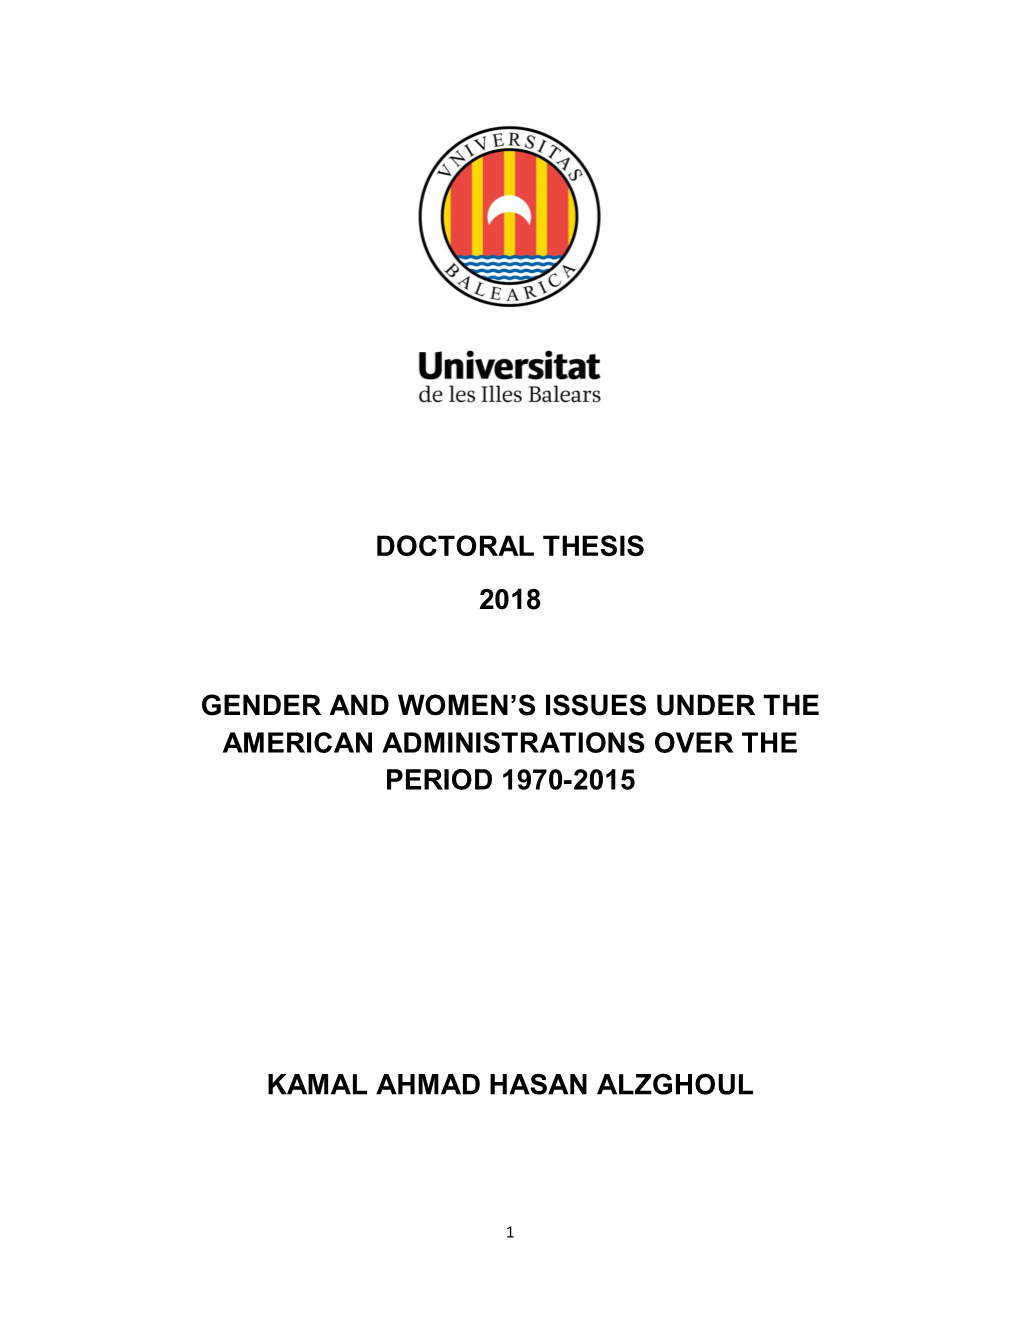 Doctoral Thesis 2018 Gender and Women's Issues